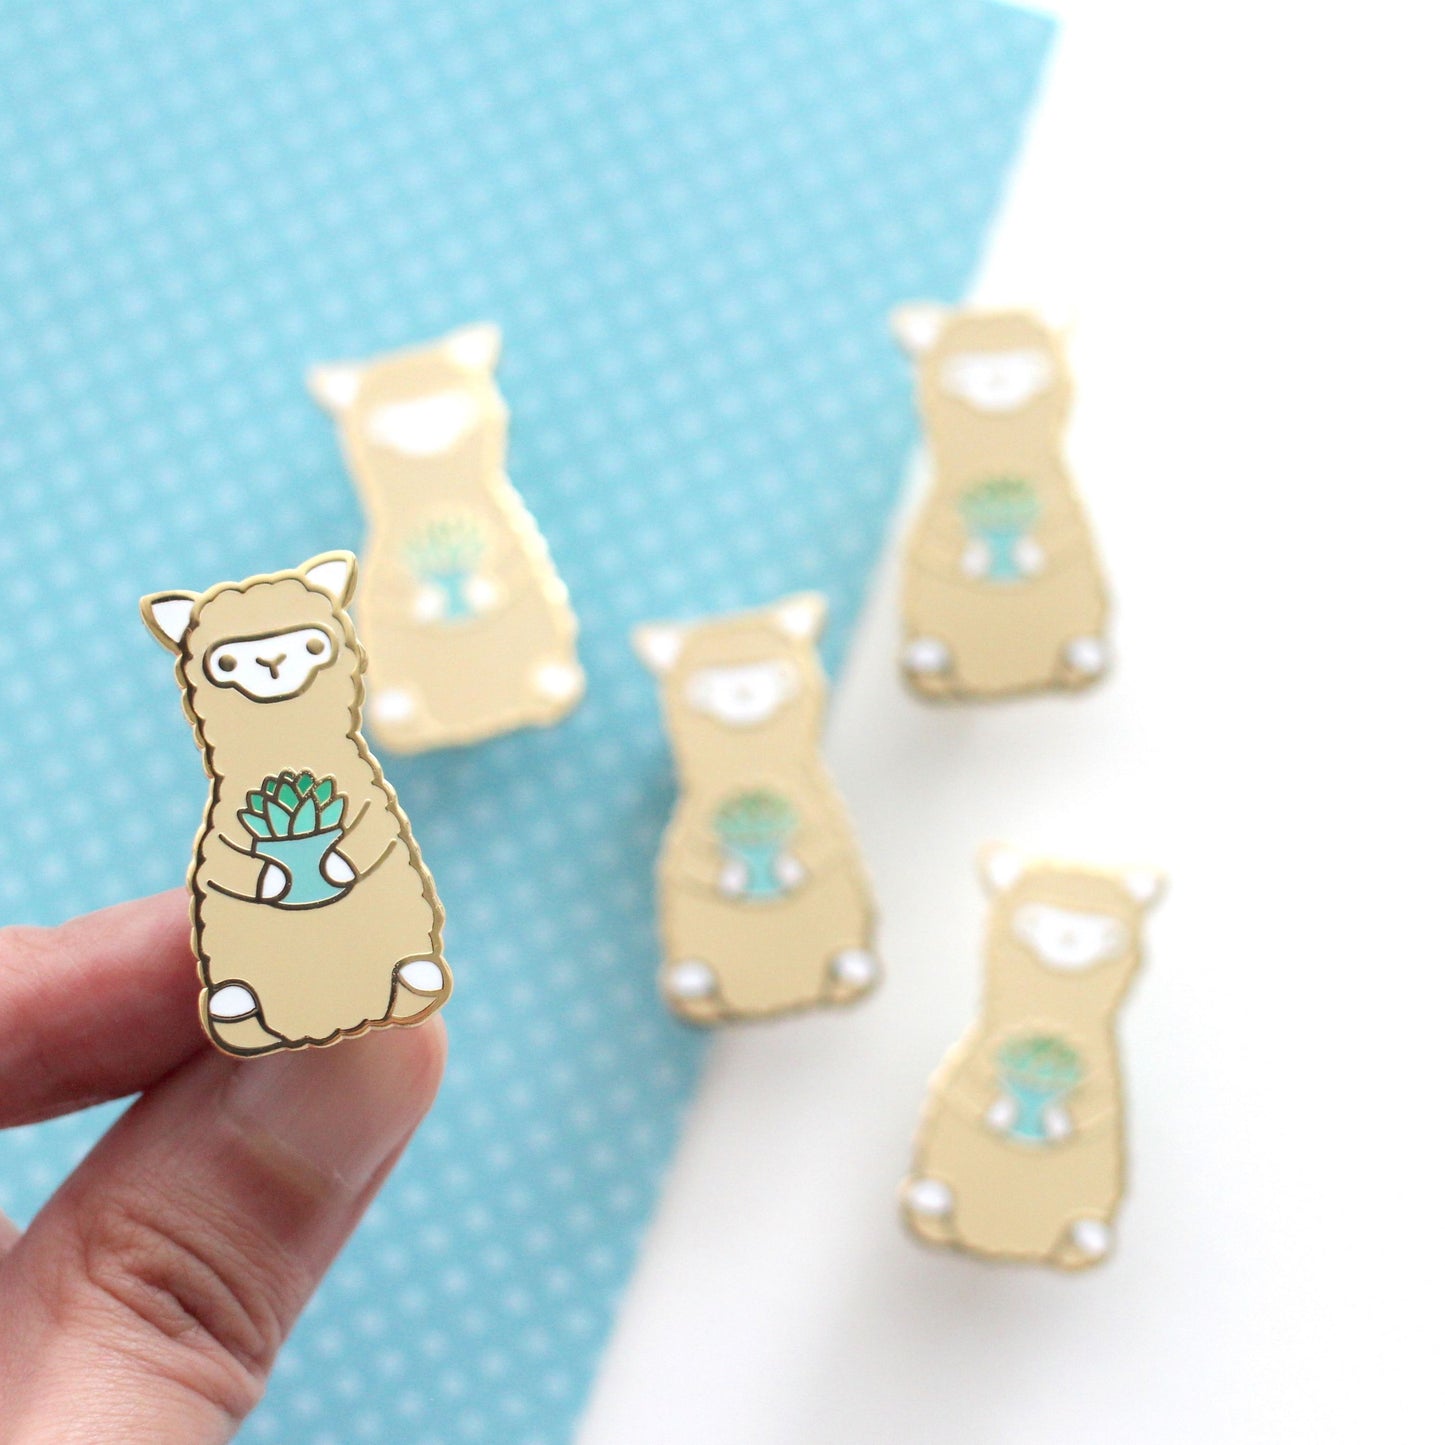 Succulent Alpaca Enamel Pin. Llama Gift. Pin for Backpacks by Wild Whimsy Woolies